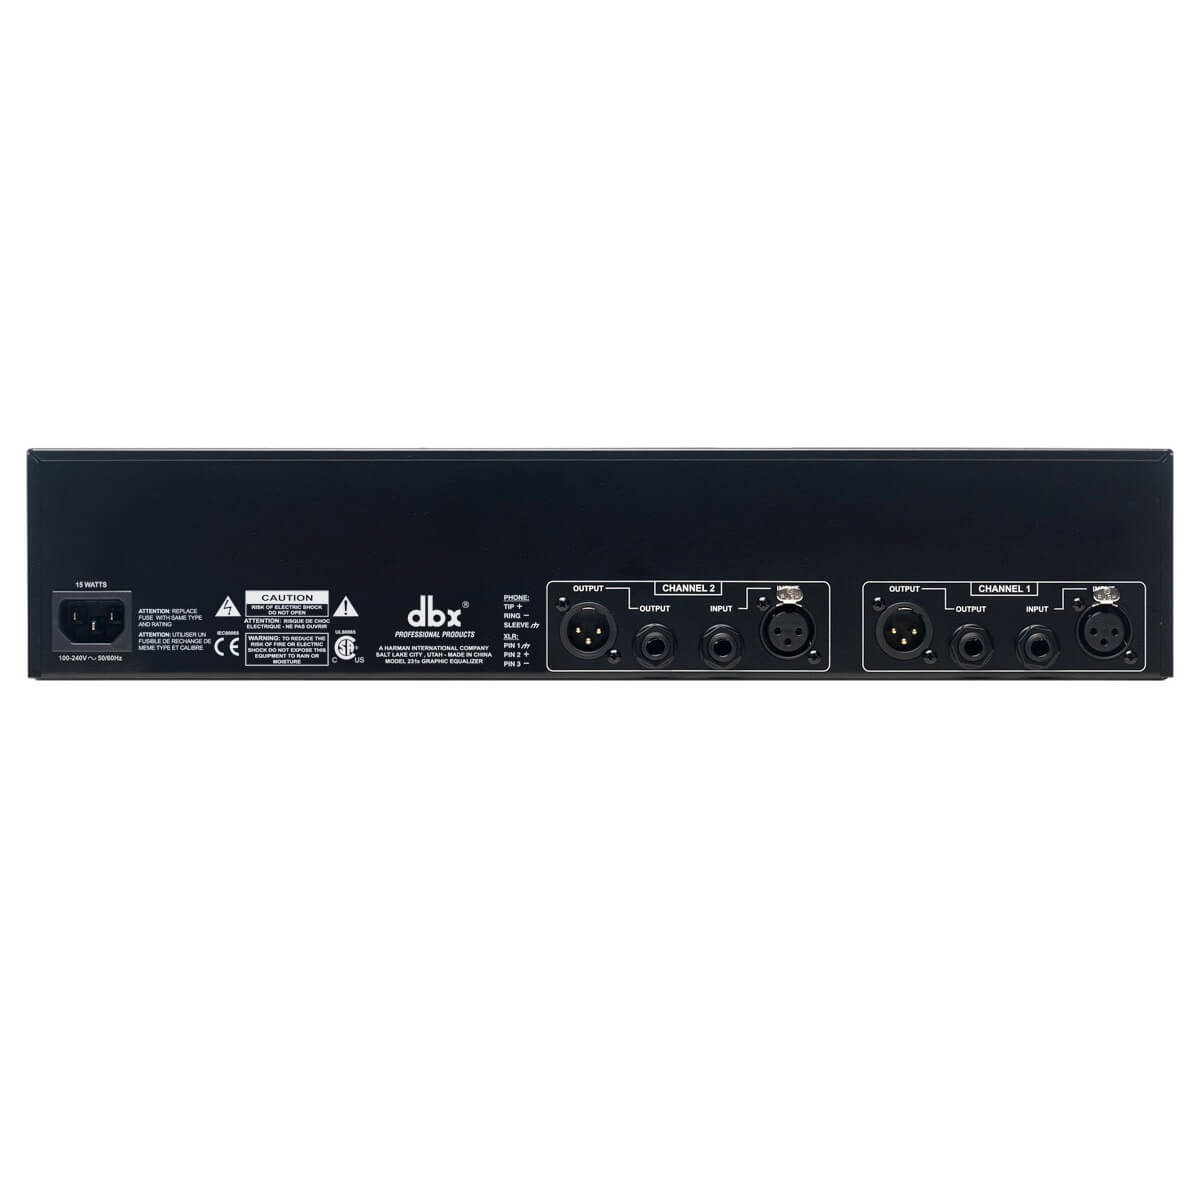 dbx 231s - Dual Channel, 31-Band Equalizer